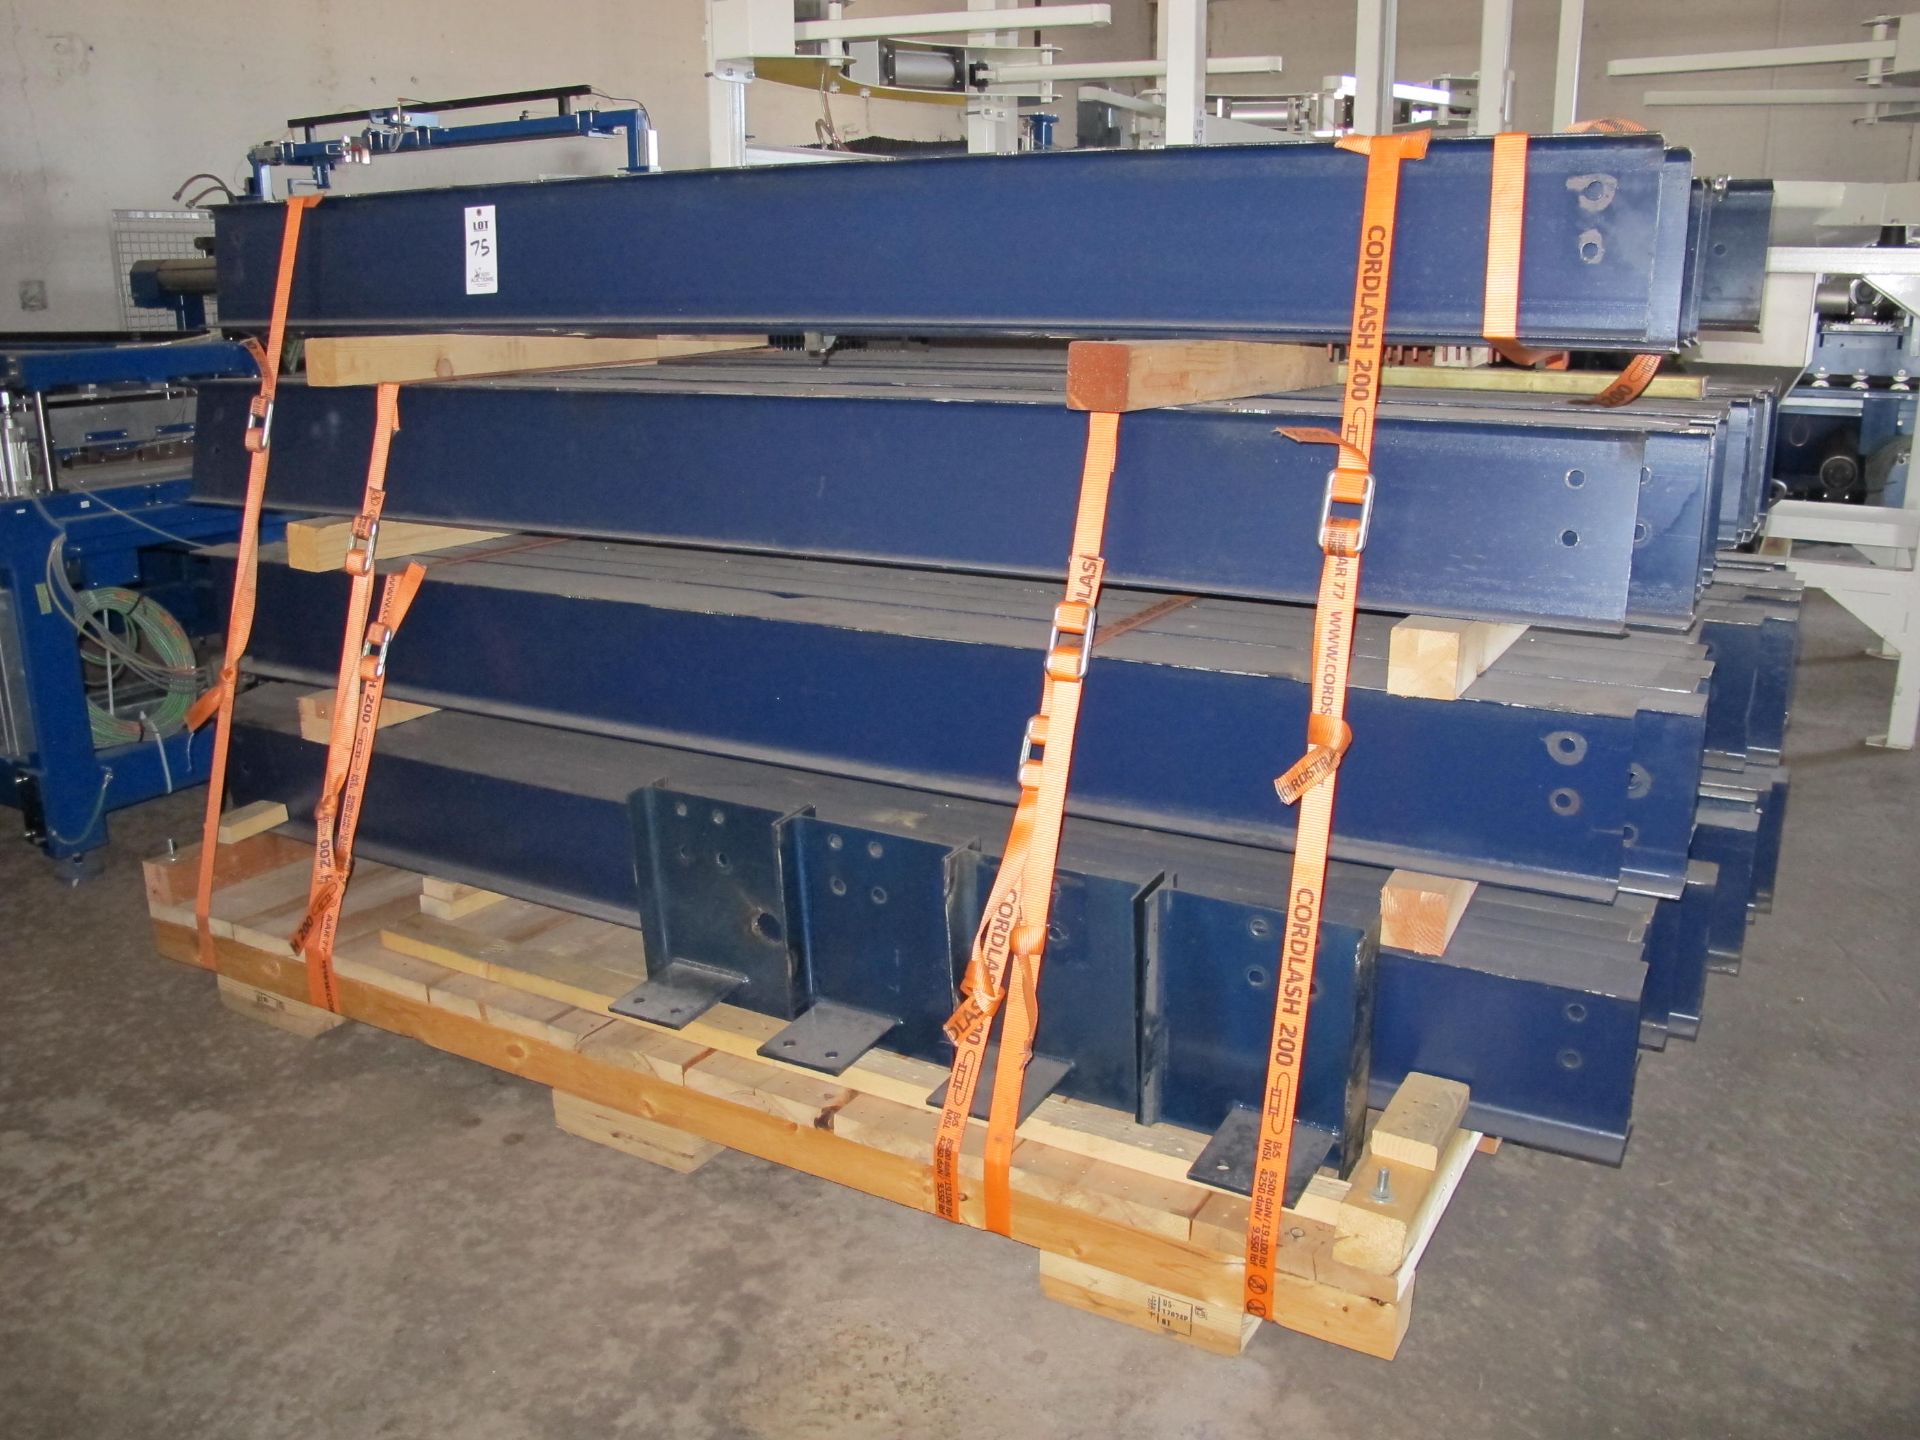 MEZZANINE STRUCTURE, STEEL DECK, ROUGHLY 40' X 40', STAIRS, HAND RAILS, PLATFORMS, ETC., LOADING &